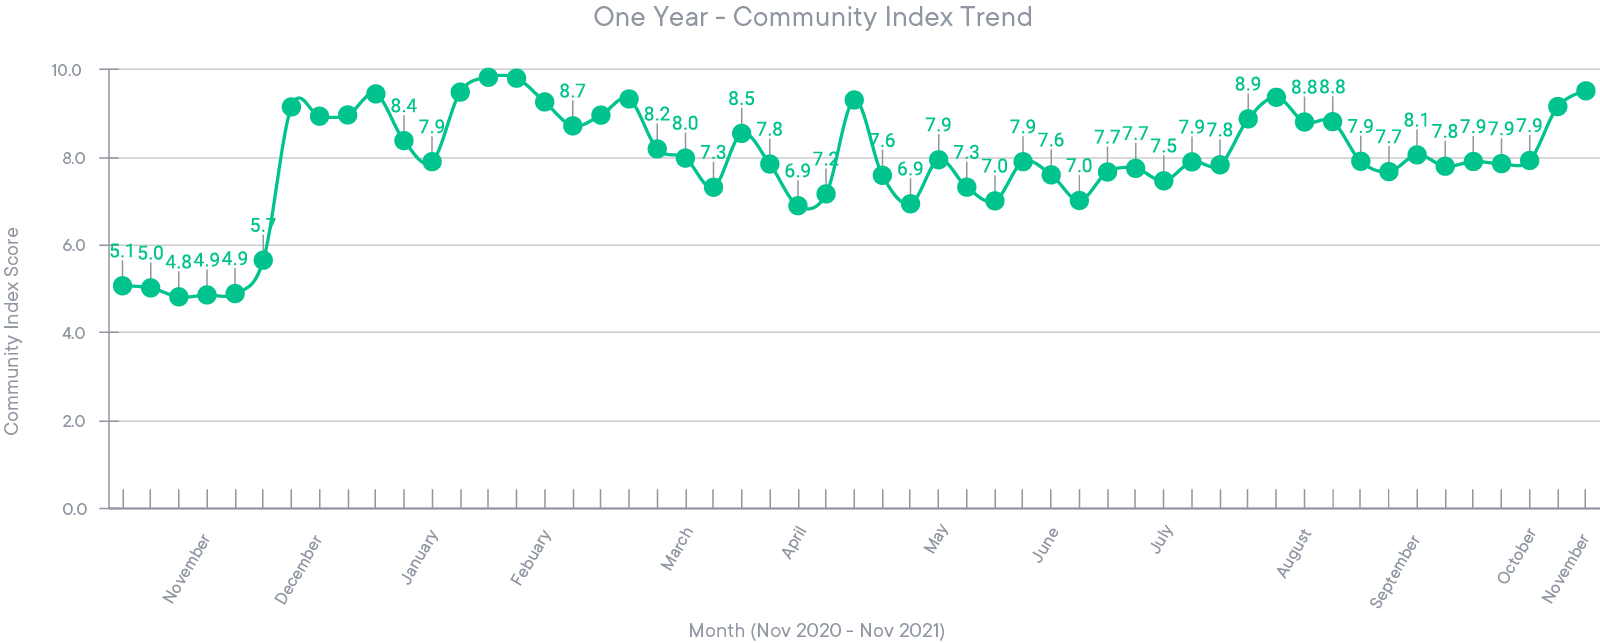 One Year - Community Index Trend 